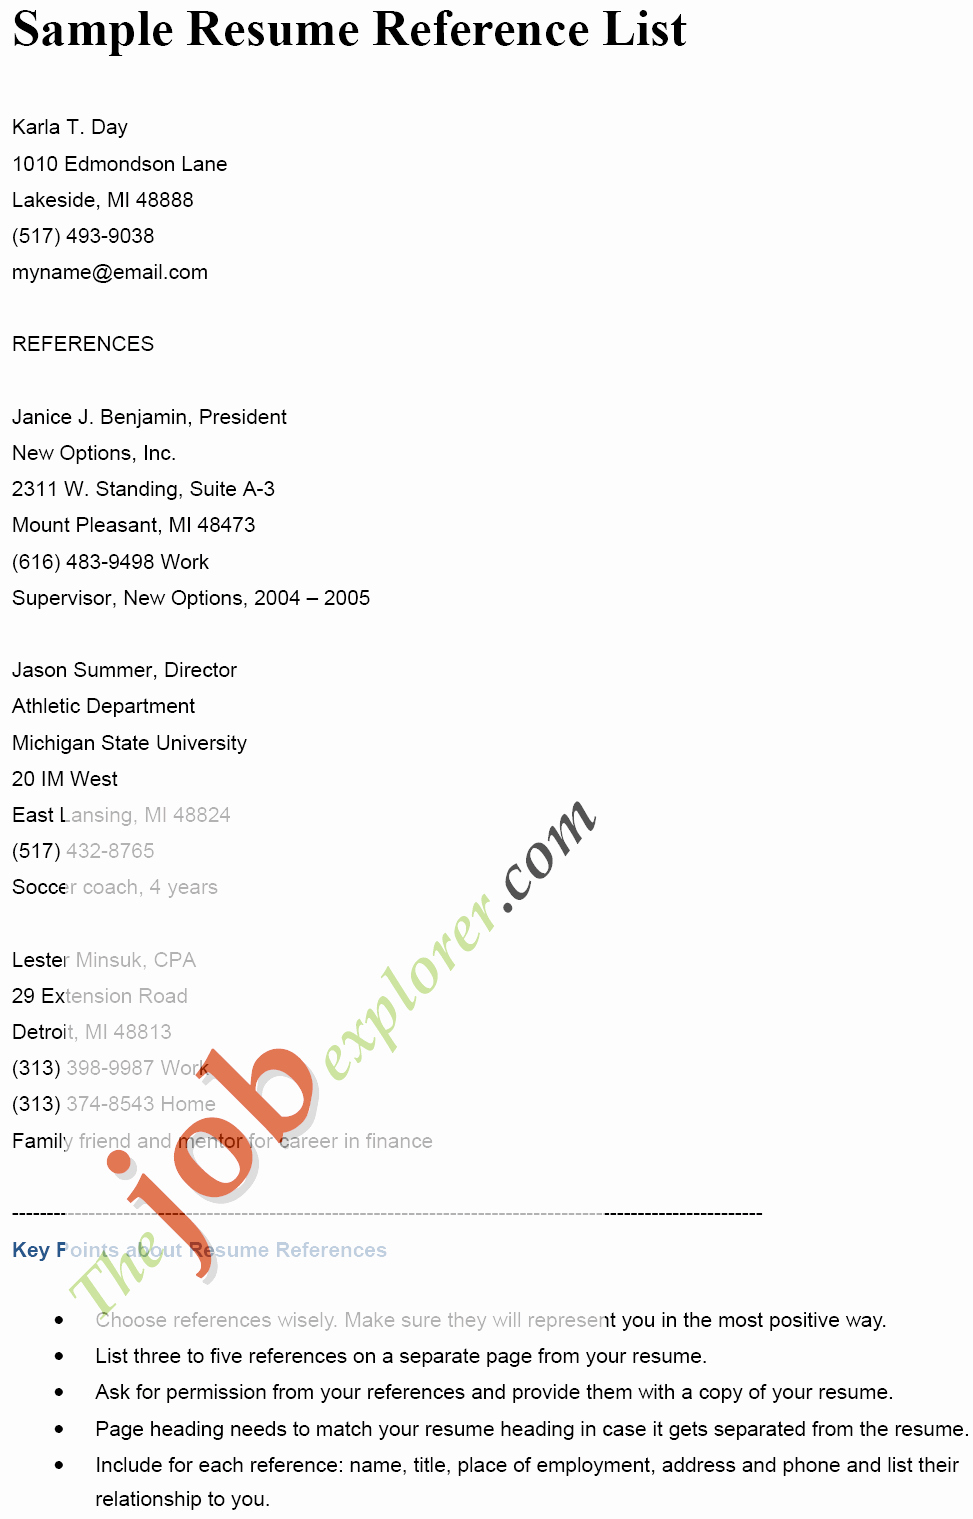 Reference Page Layout for Resume Beautiful Copy A Professional Reference List – Perfect Resume format